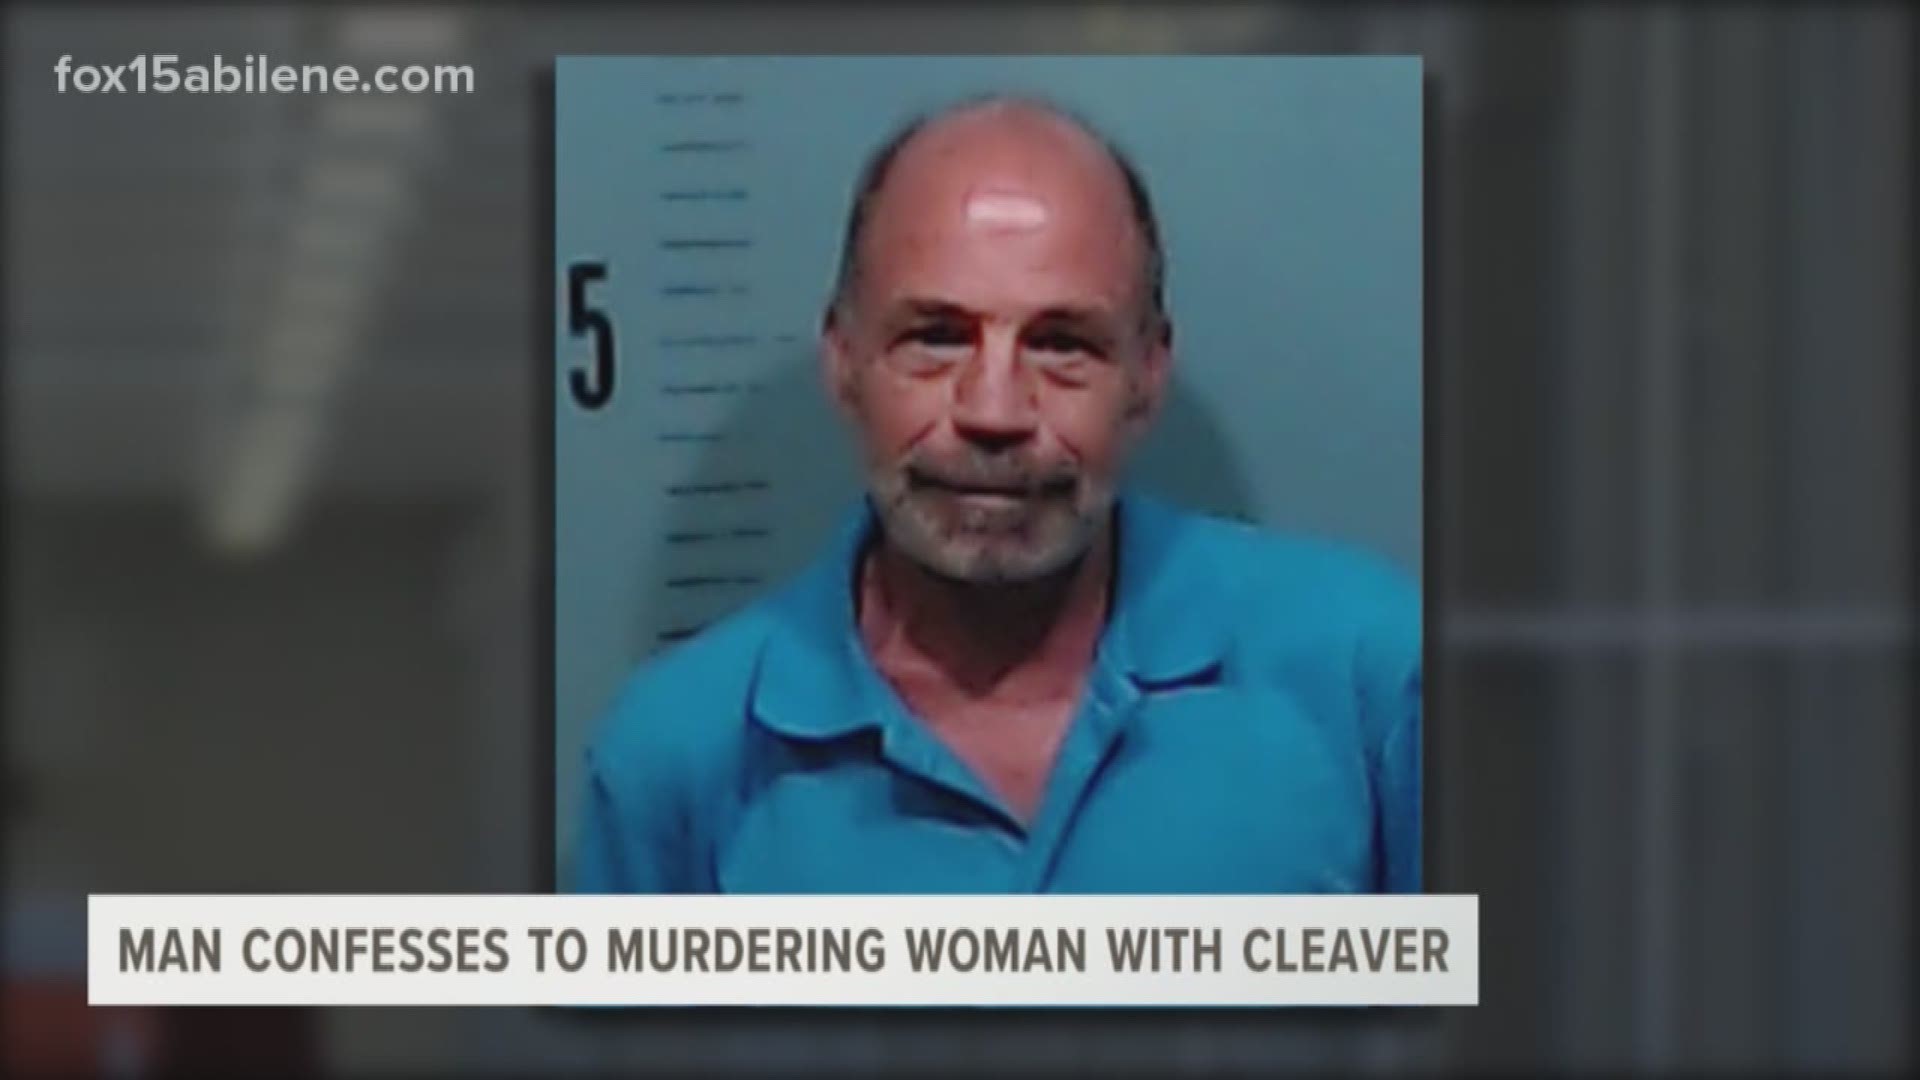 "He stated he killed her with a cleaver," documents show.